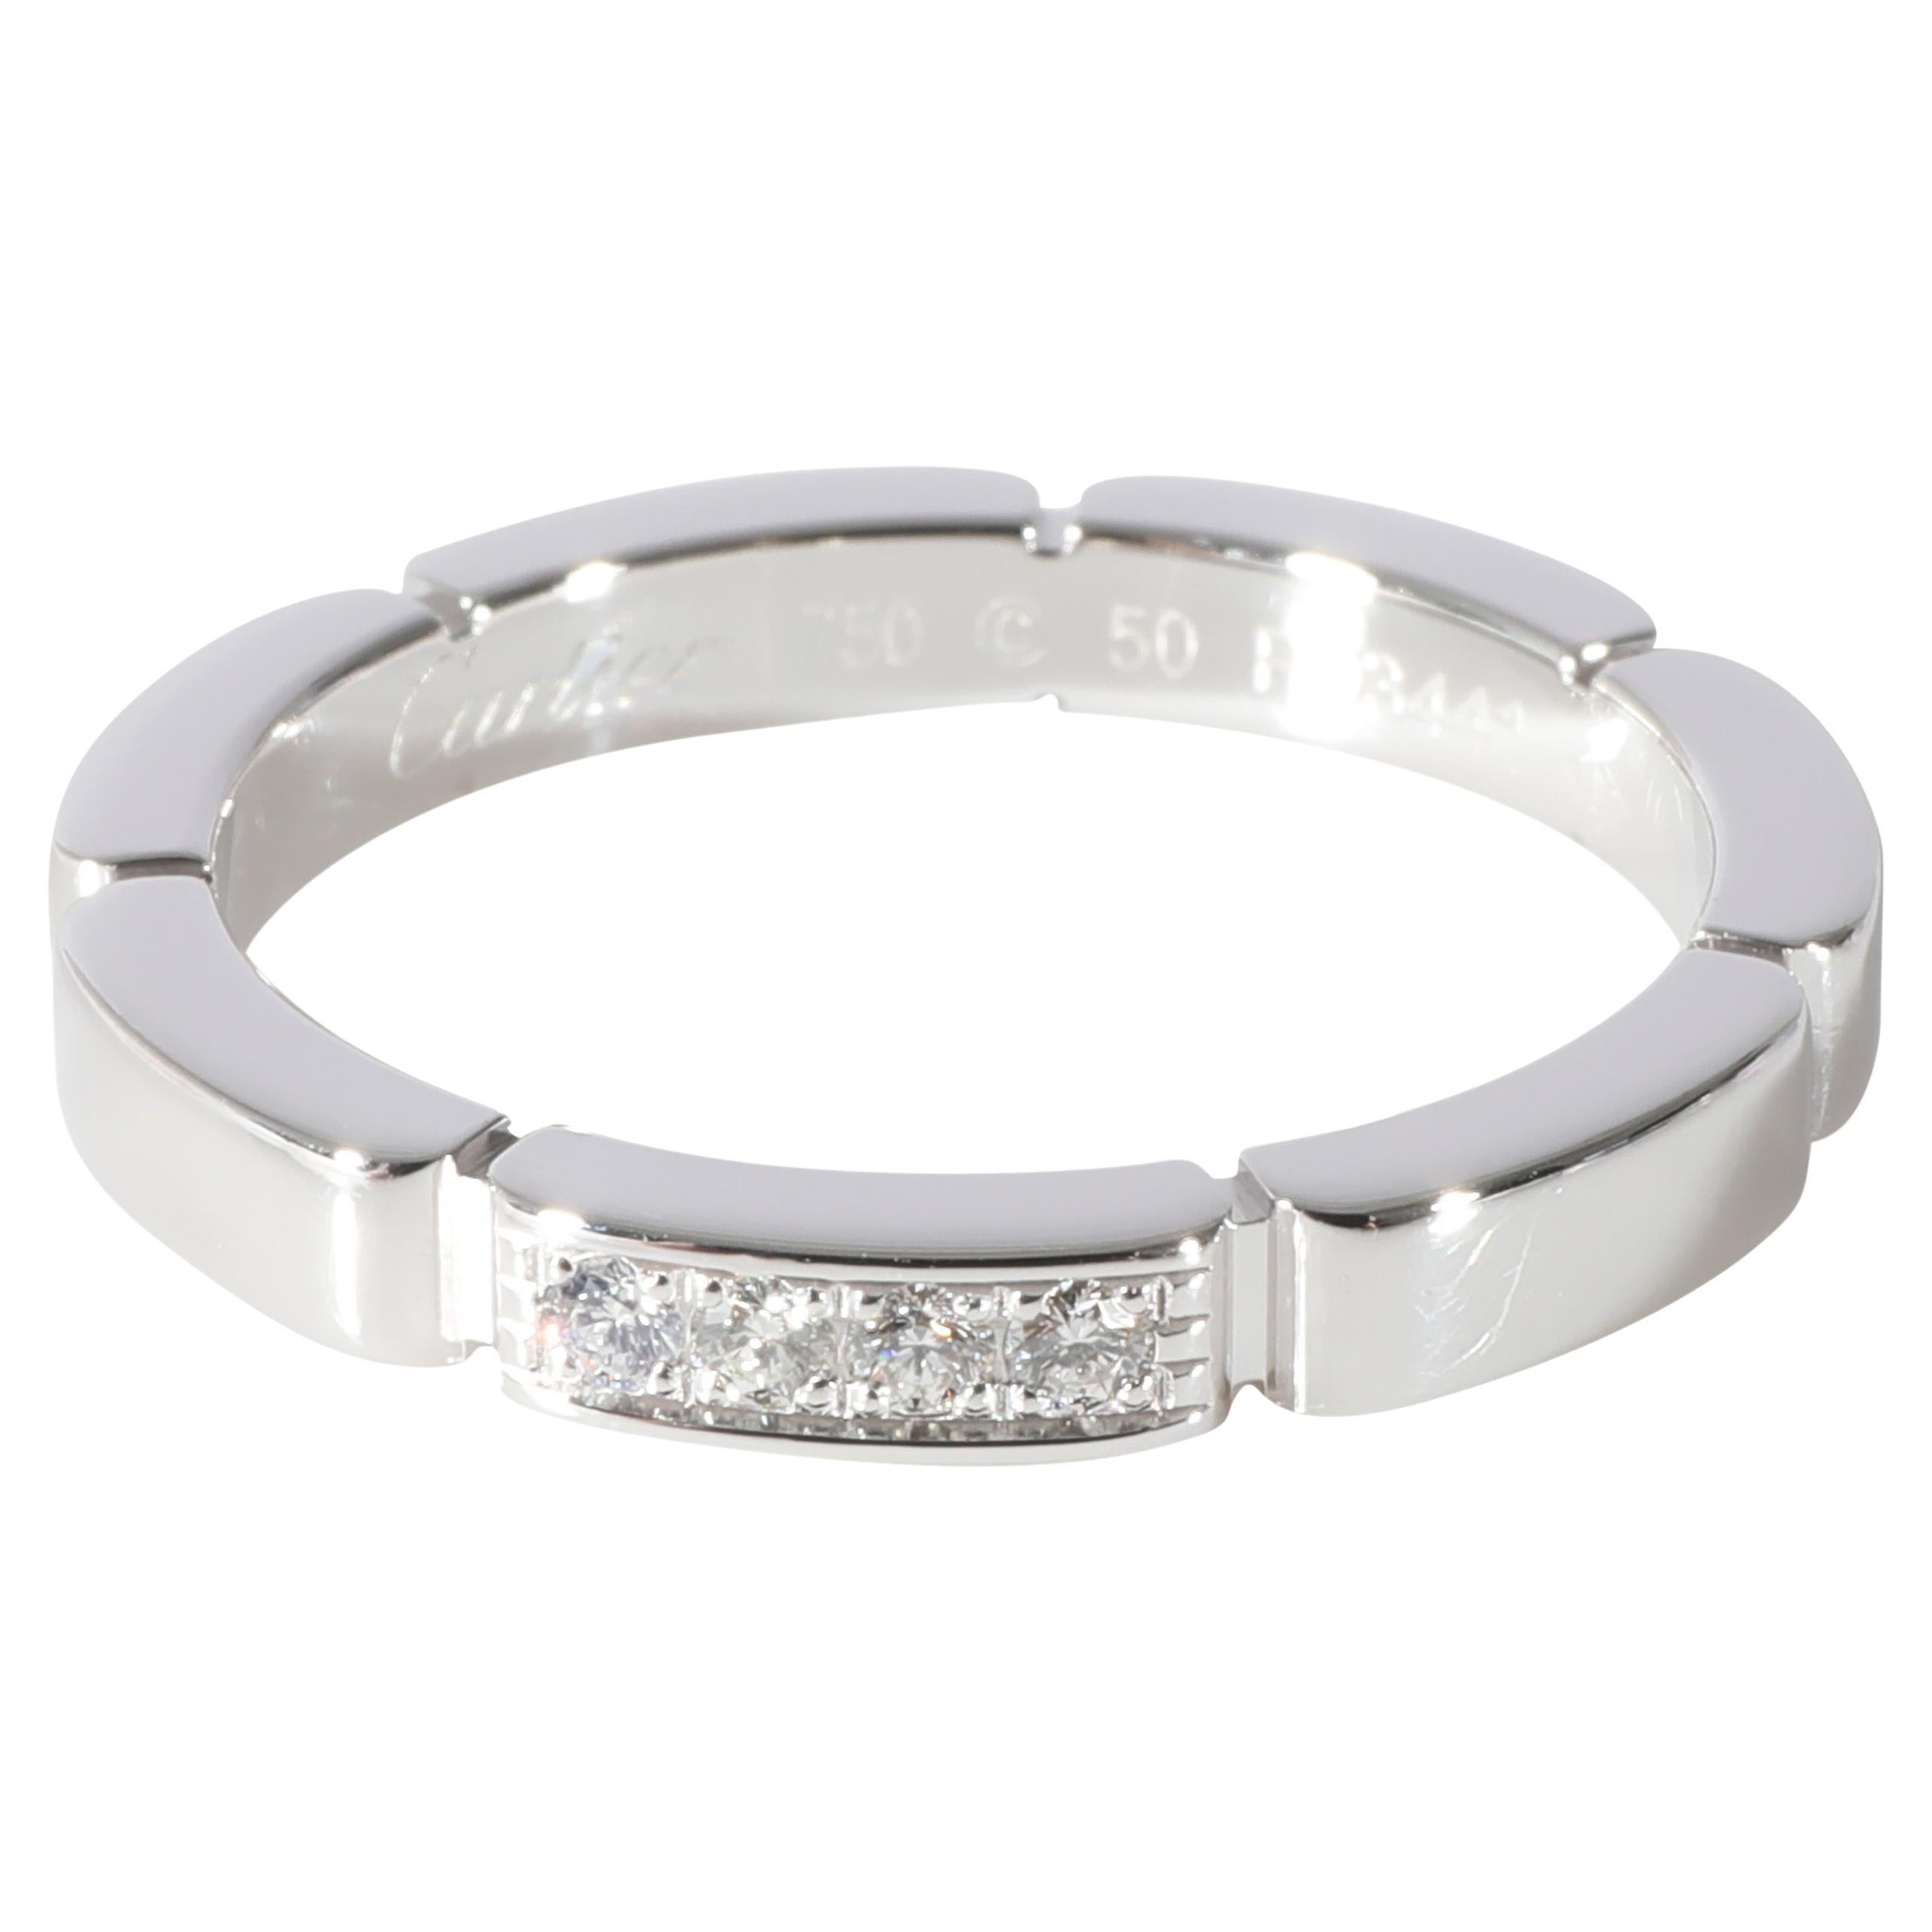 Cartier Maillon Panthere Diamond Band in Platinum 0.05 CTW